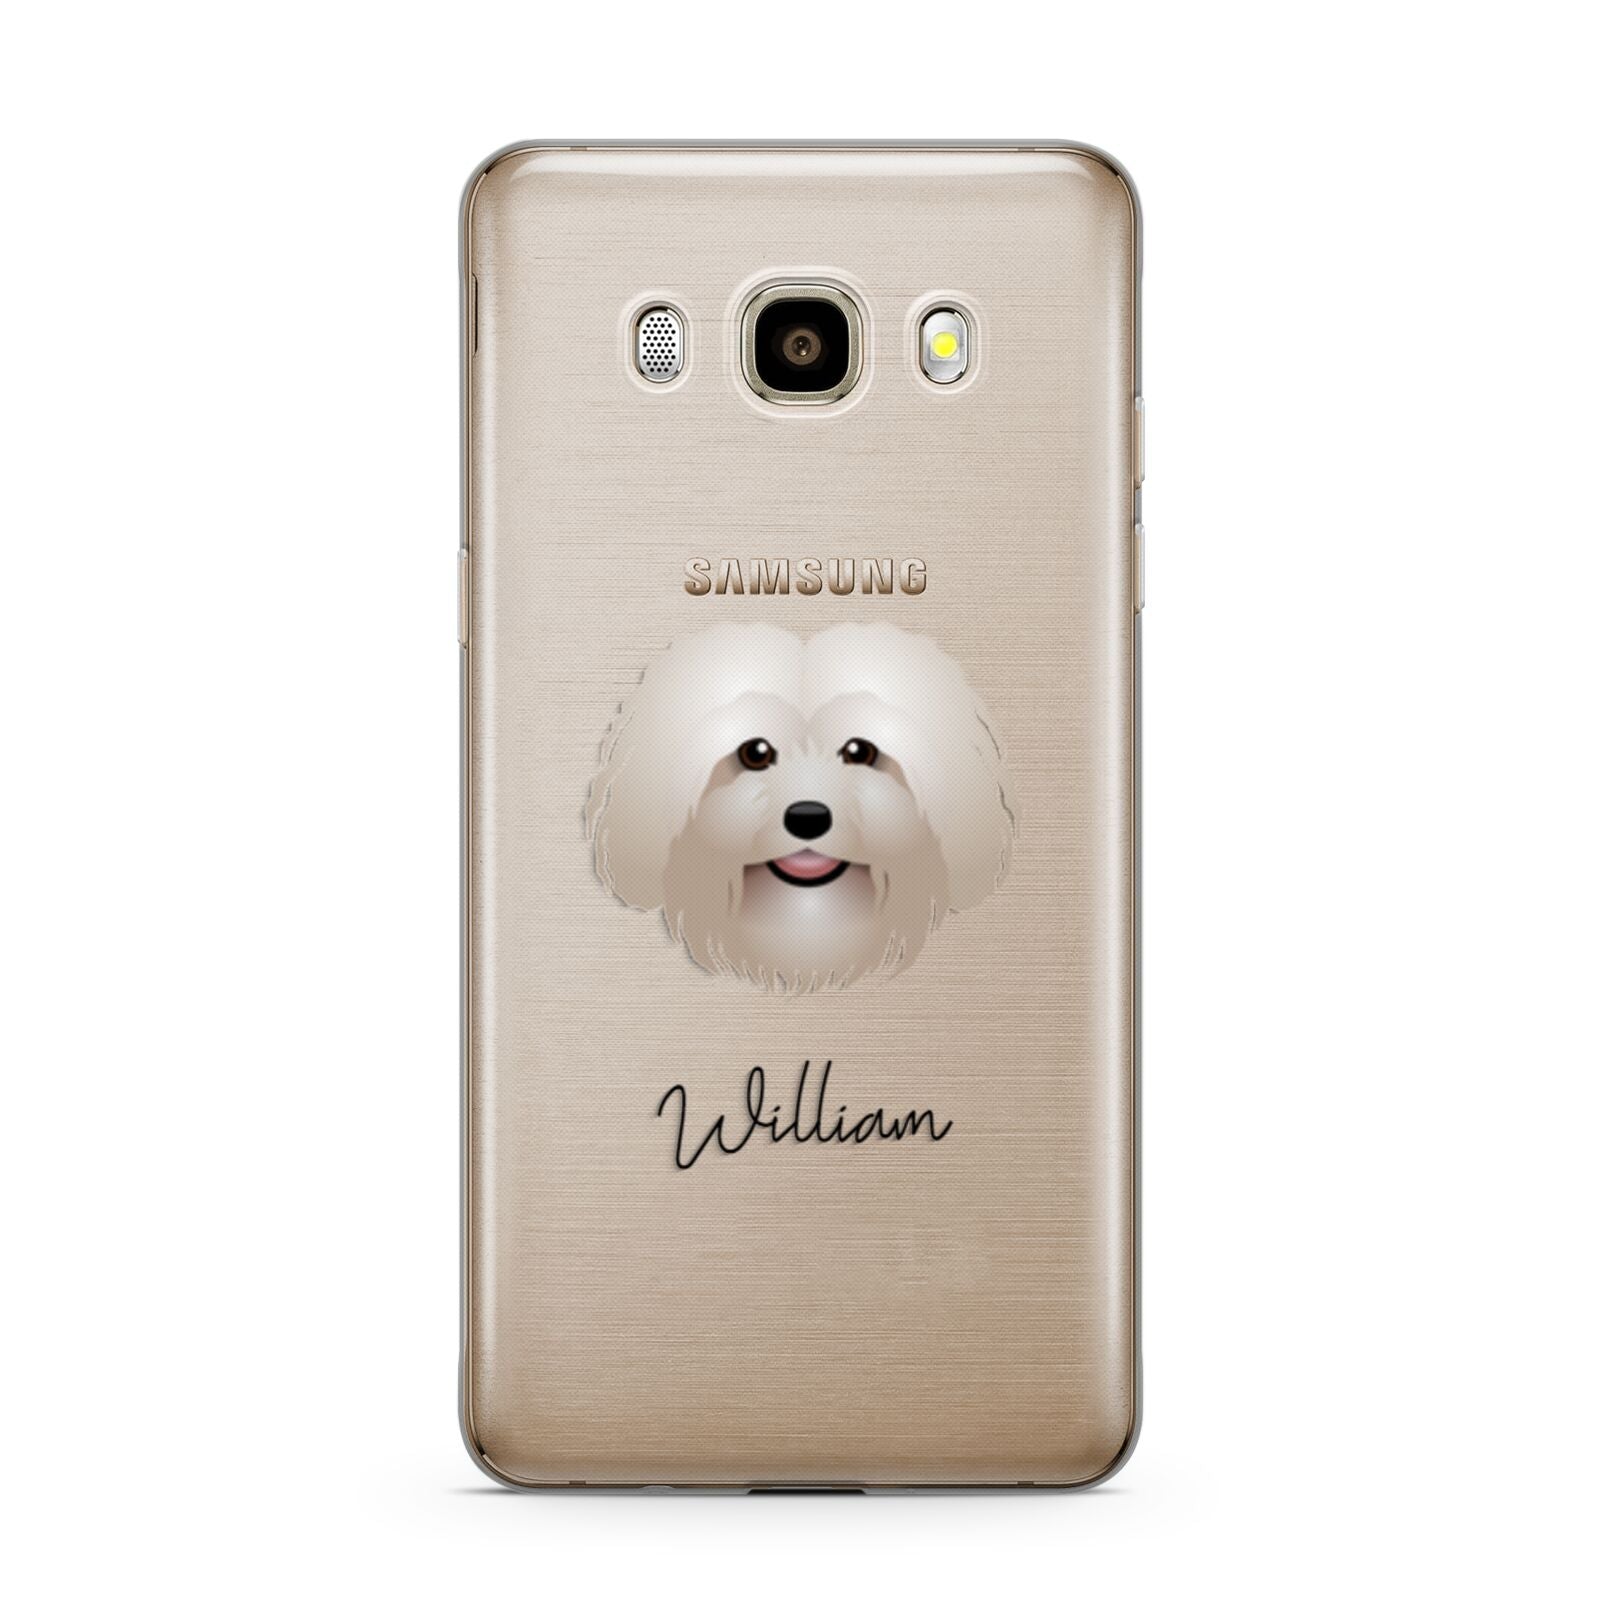 Bolognese Personalised Samsung Galaxy J7 2016 Case on gold phone